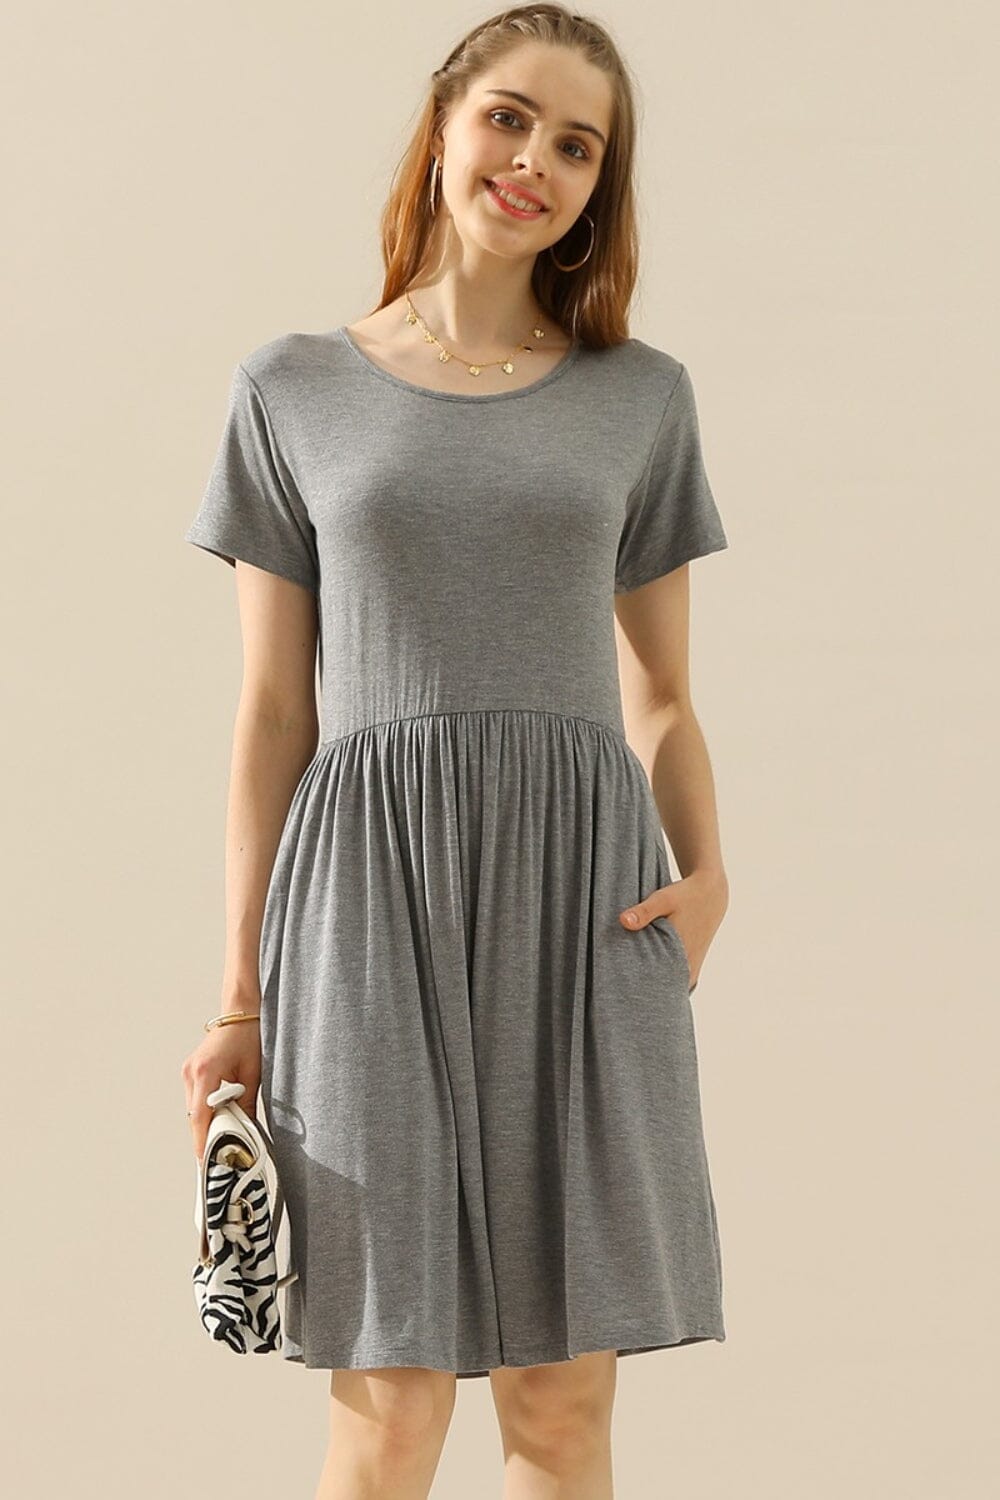 Ninexis Round Neck Ruched Dress with Pockets Dresses jehouze H GREY S 